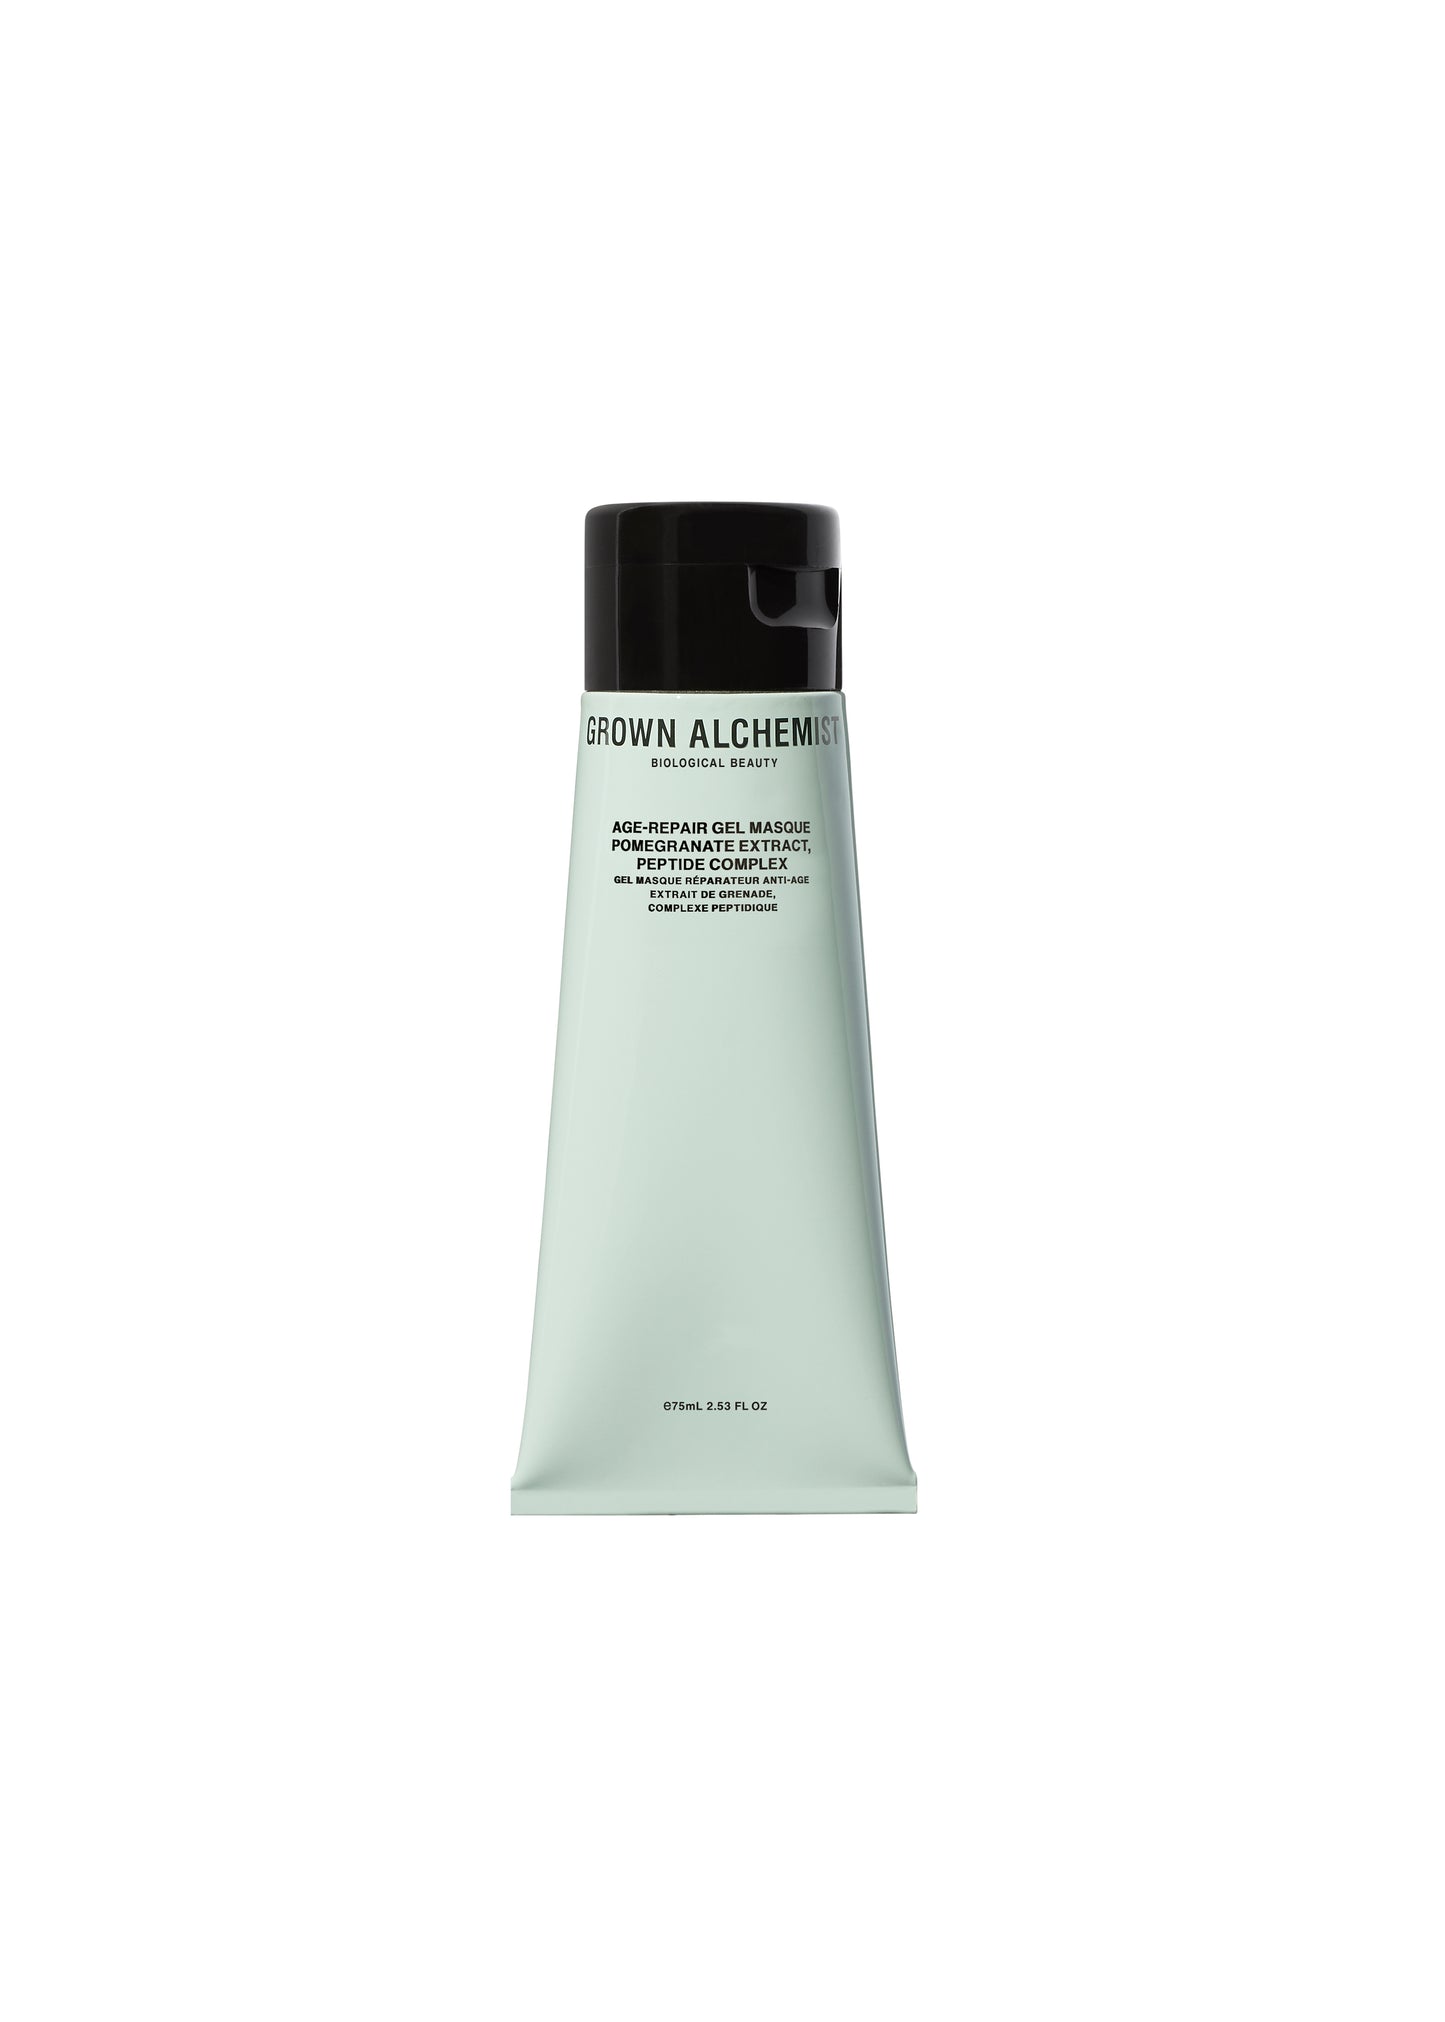 Age-Repair Gel Masque | Pomegranate Extract, Peptide Complex